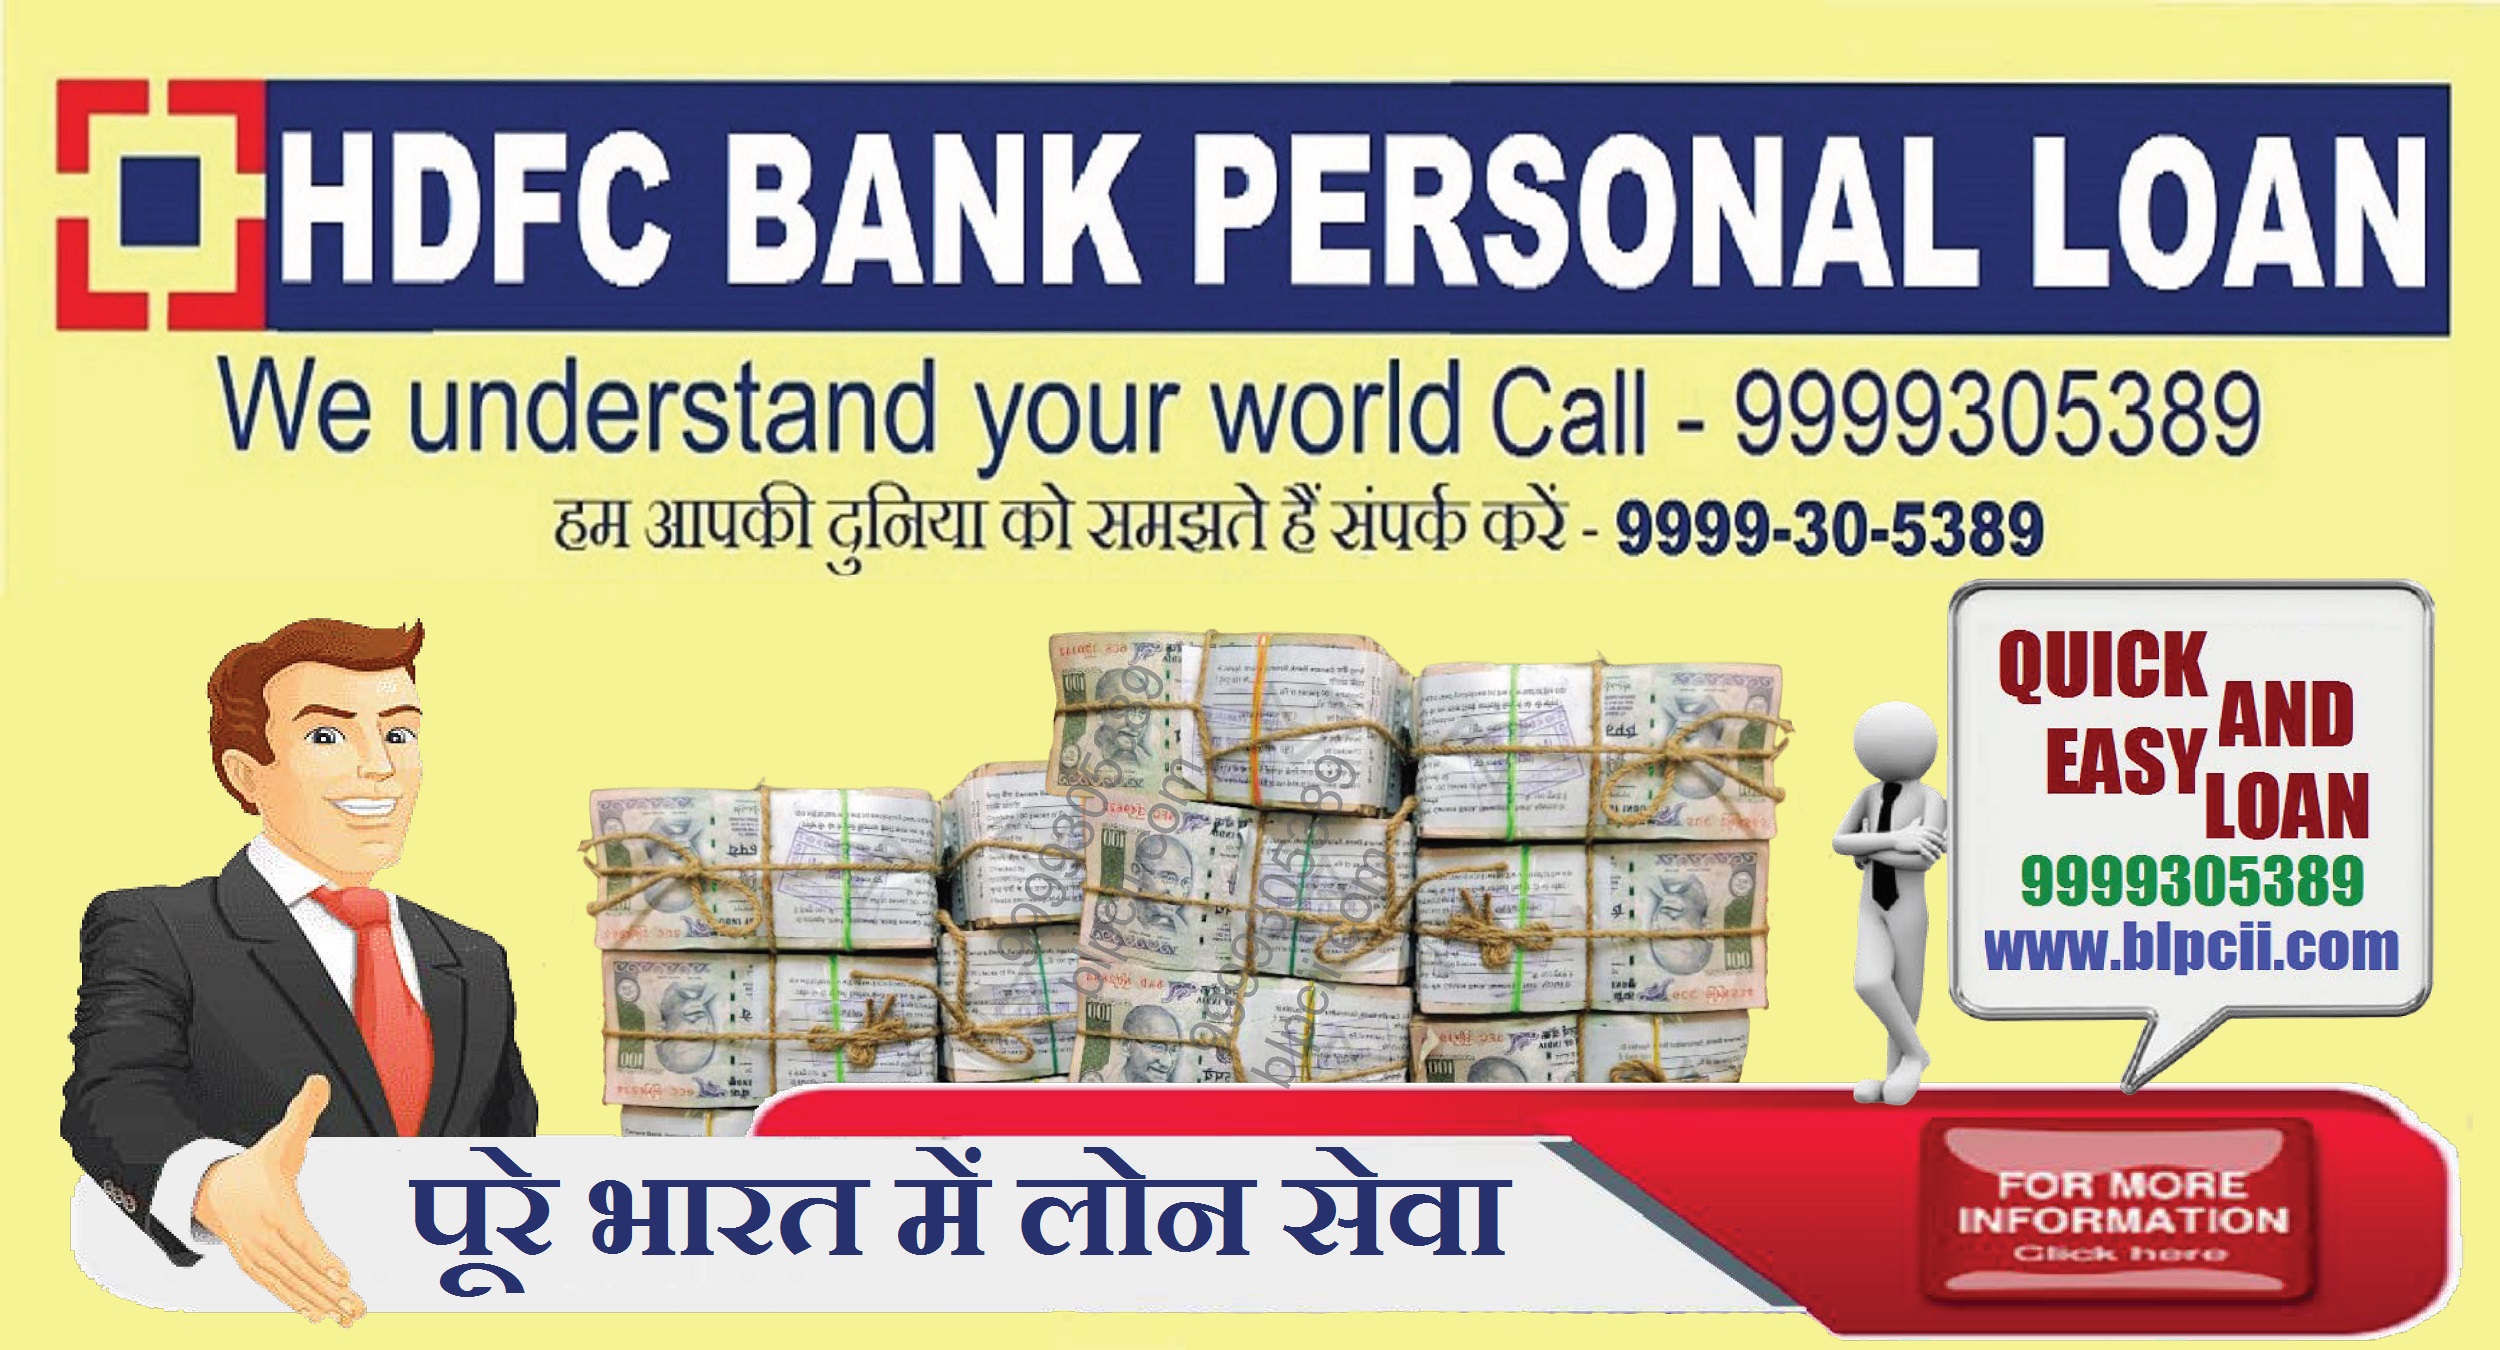 This Is Currently Hdfc Bank Personal Loan Interest Rate In The Year 2021 0963